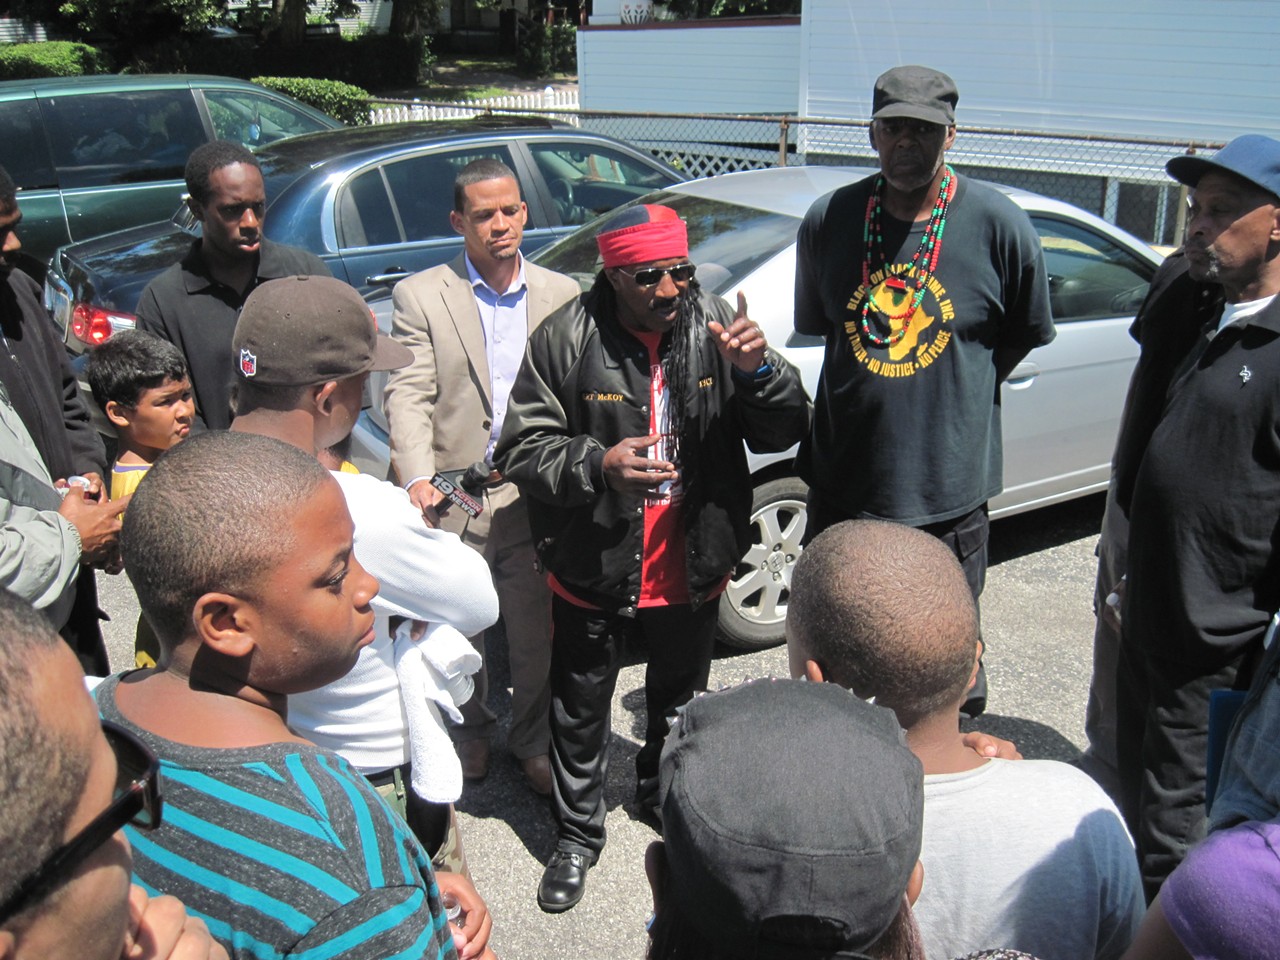 Art McKoy, founder of Black on Black Crime Inc., instructs volunteers on where they will search during the afternoon of July 24.